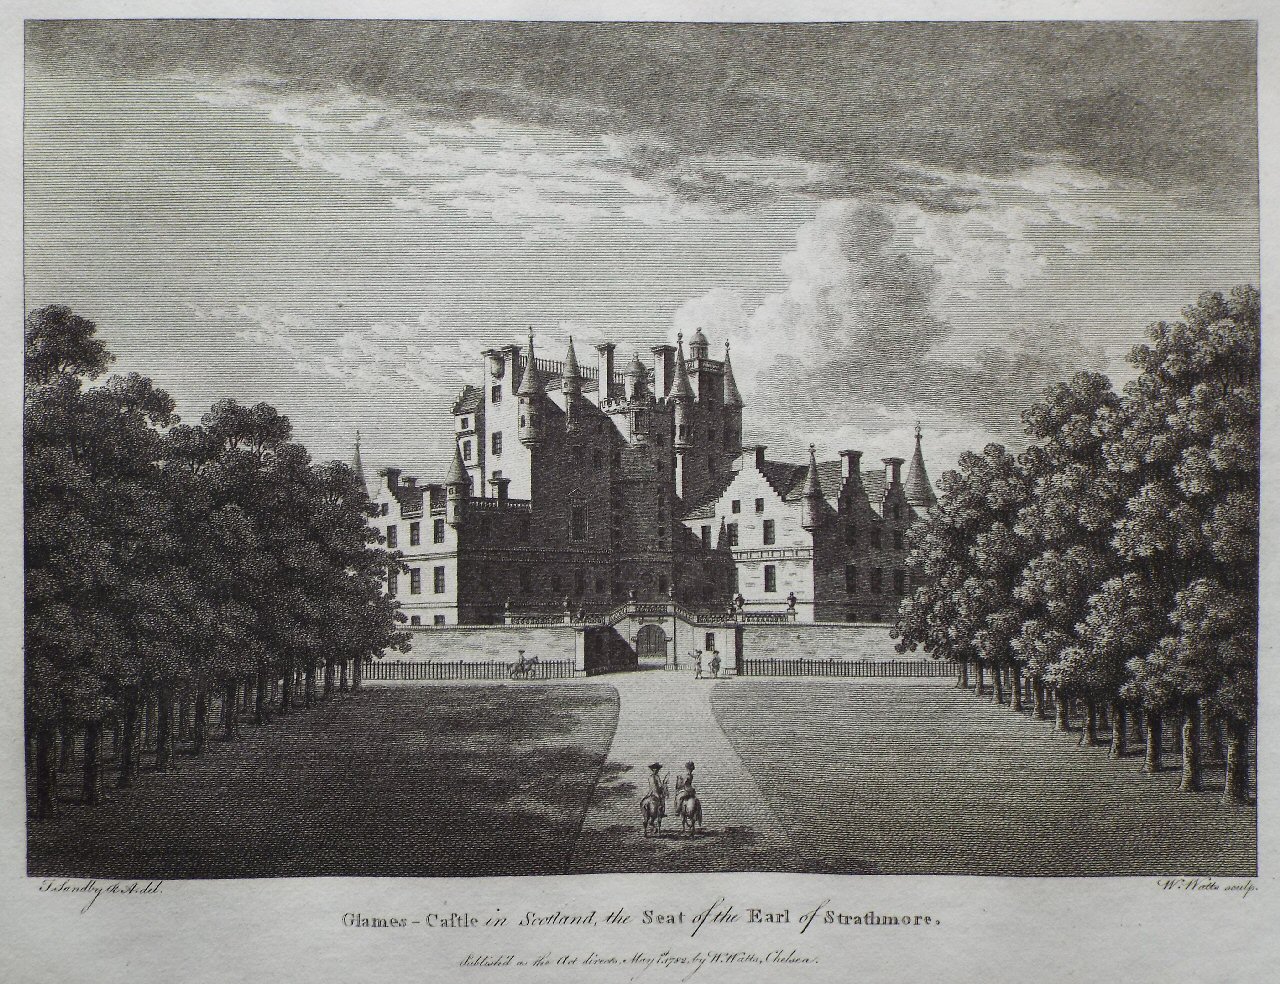 Print - Glames - Castle in Scotland, the Seat of the Earl of Strathmore. - Watts